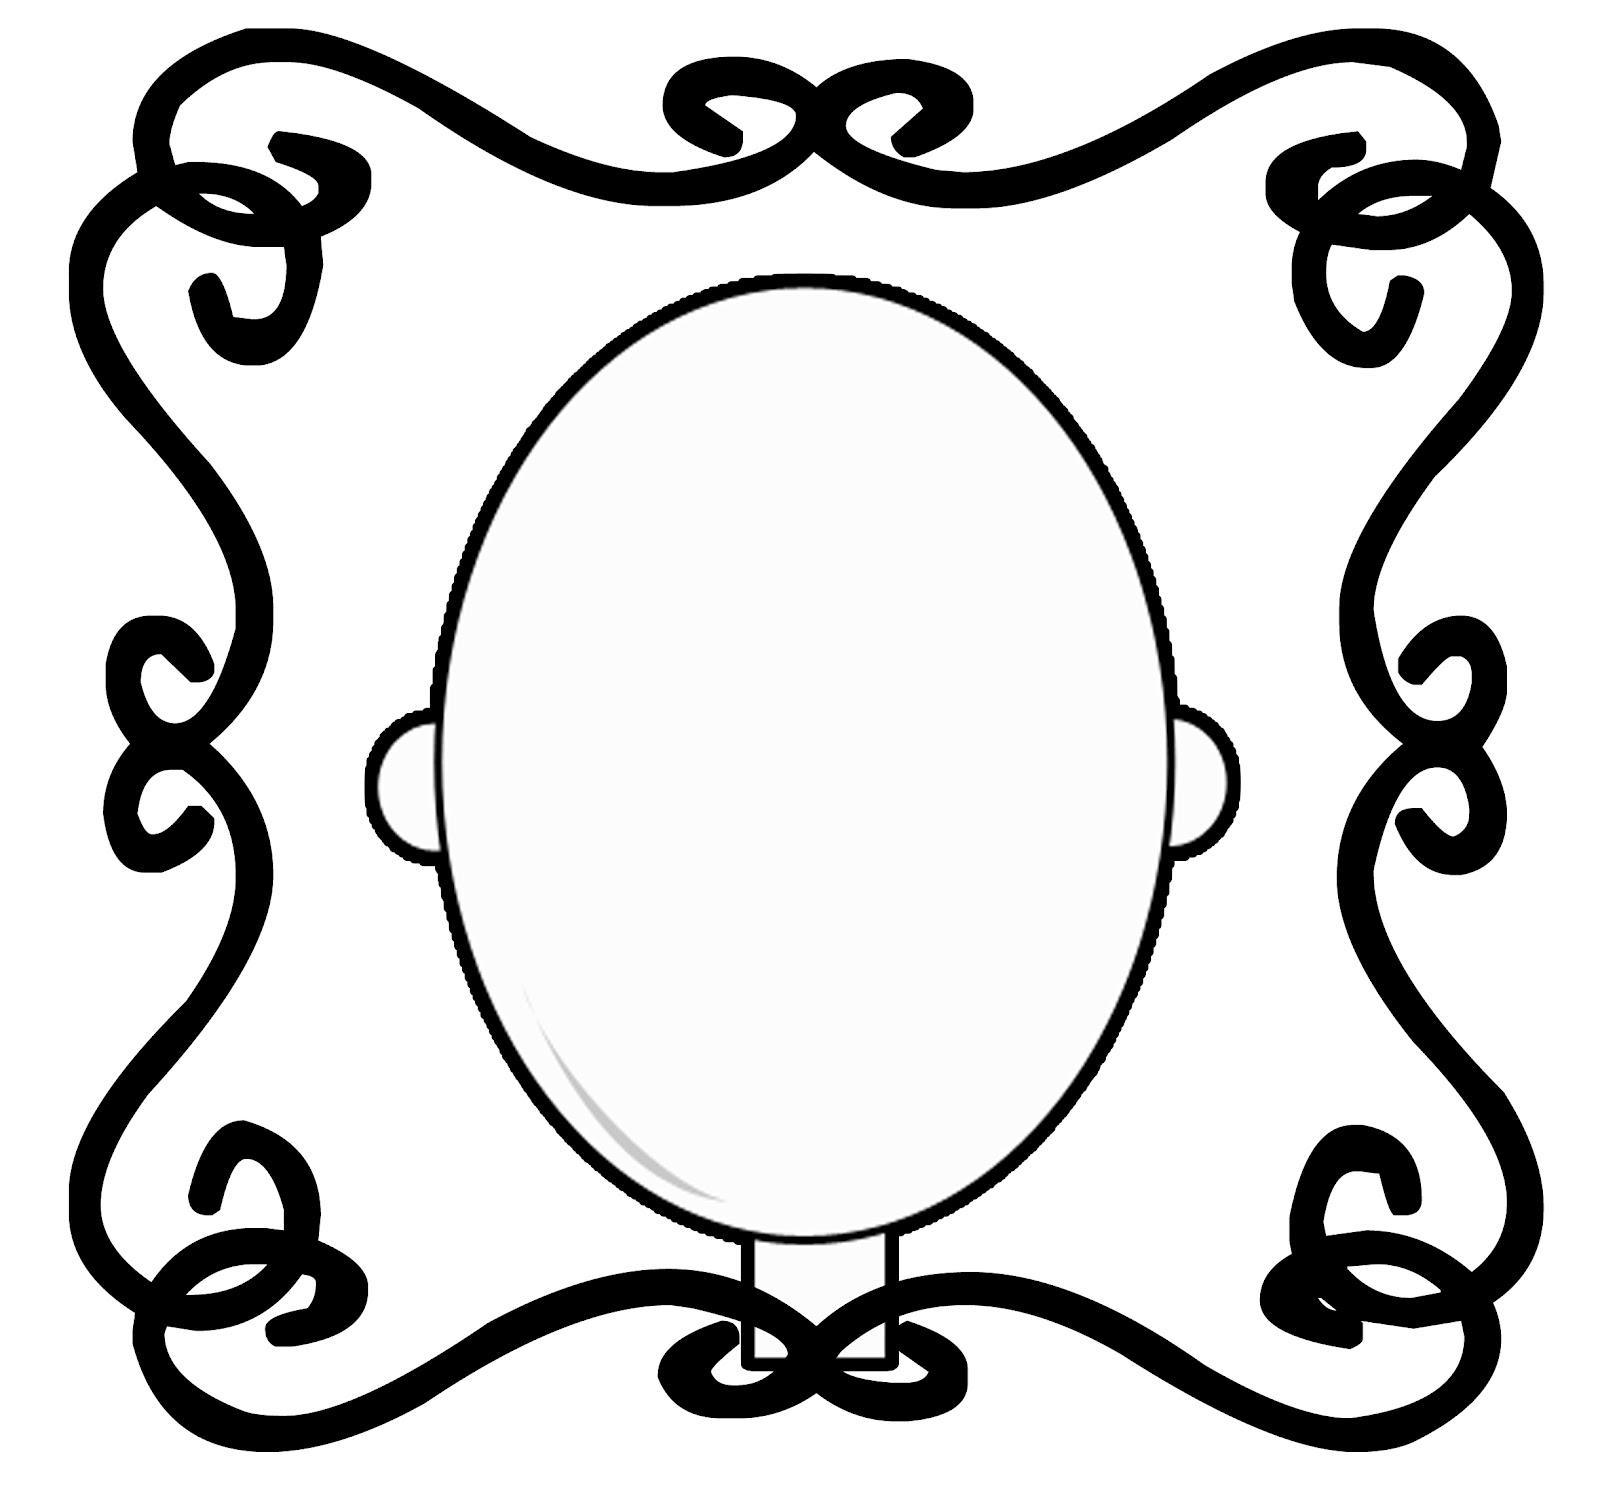 Blank Face Clip Art Vector Online Royalty Free - ClipArt Best ...